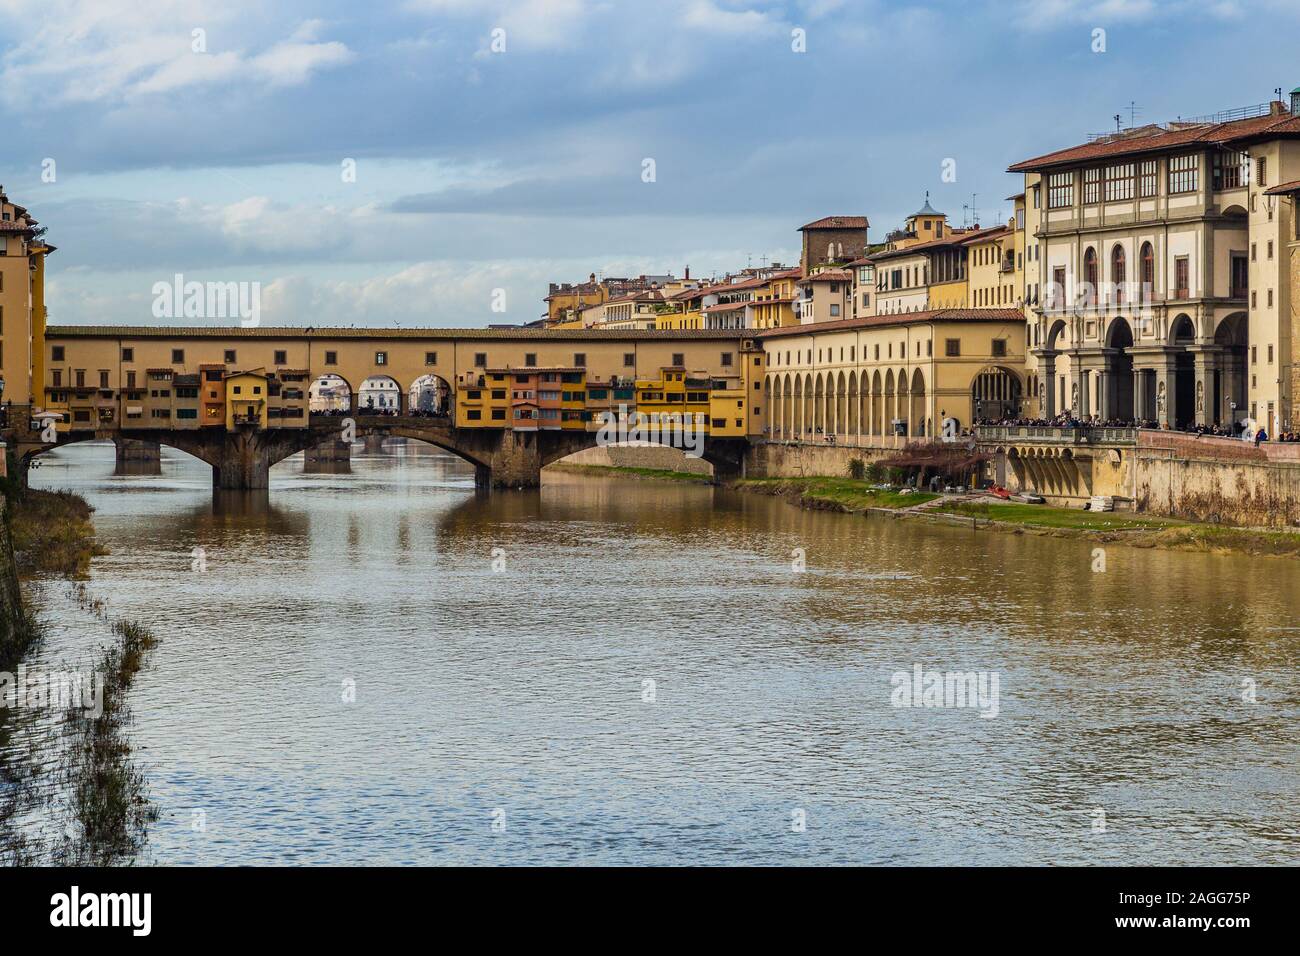 astonishing view of the Ponte Vecchio, the Old Bridge of Florence on the Arno River Stock Photo